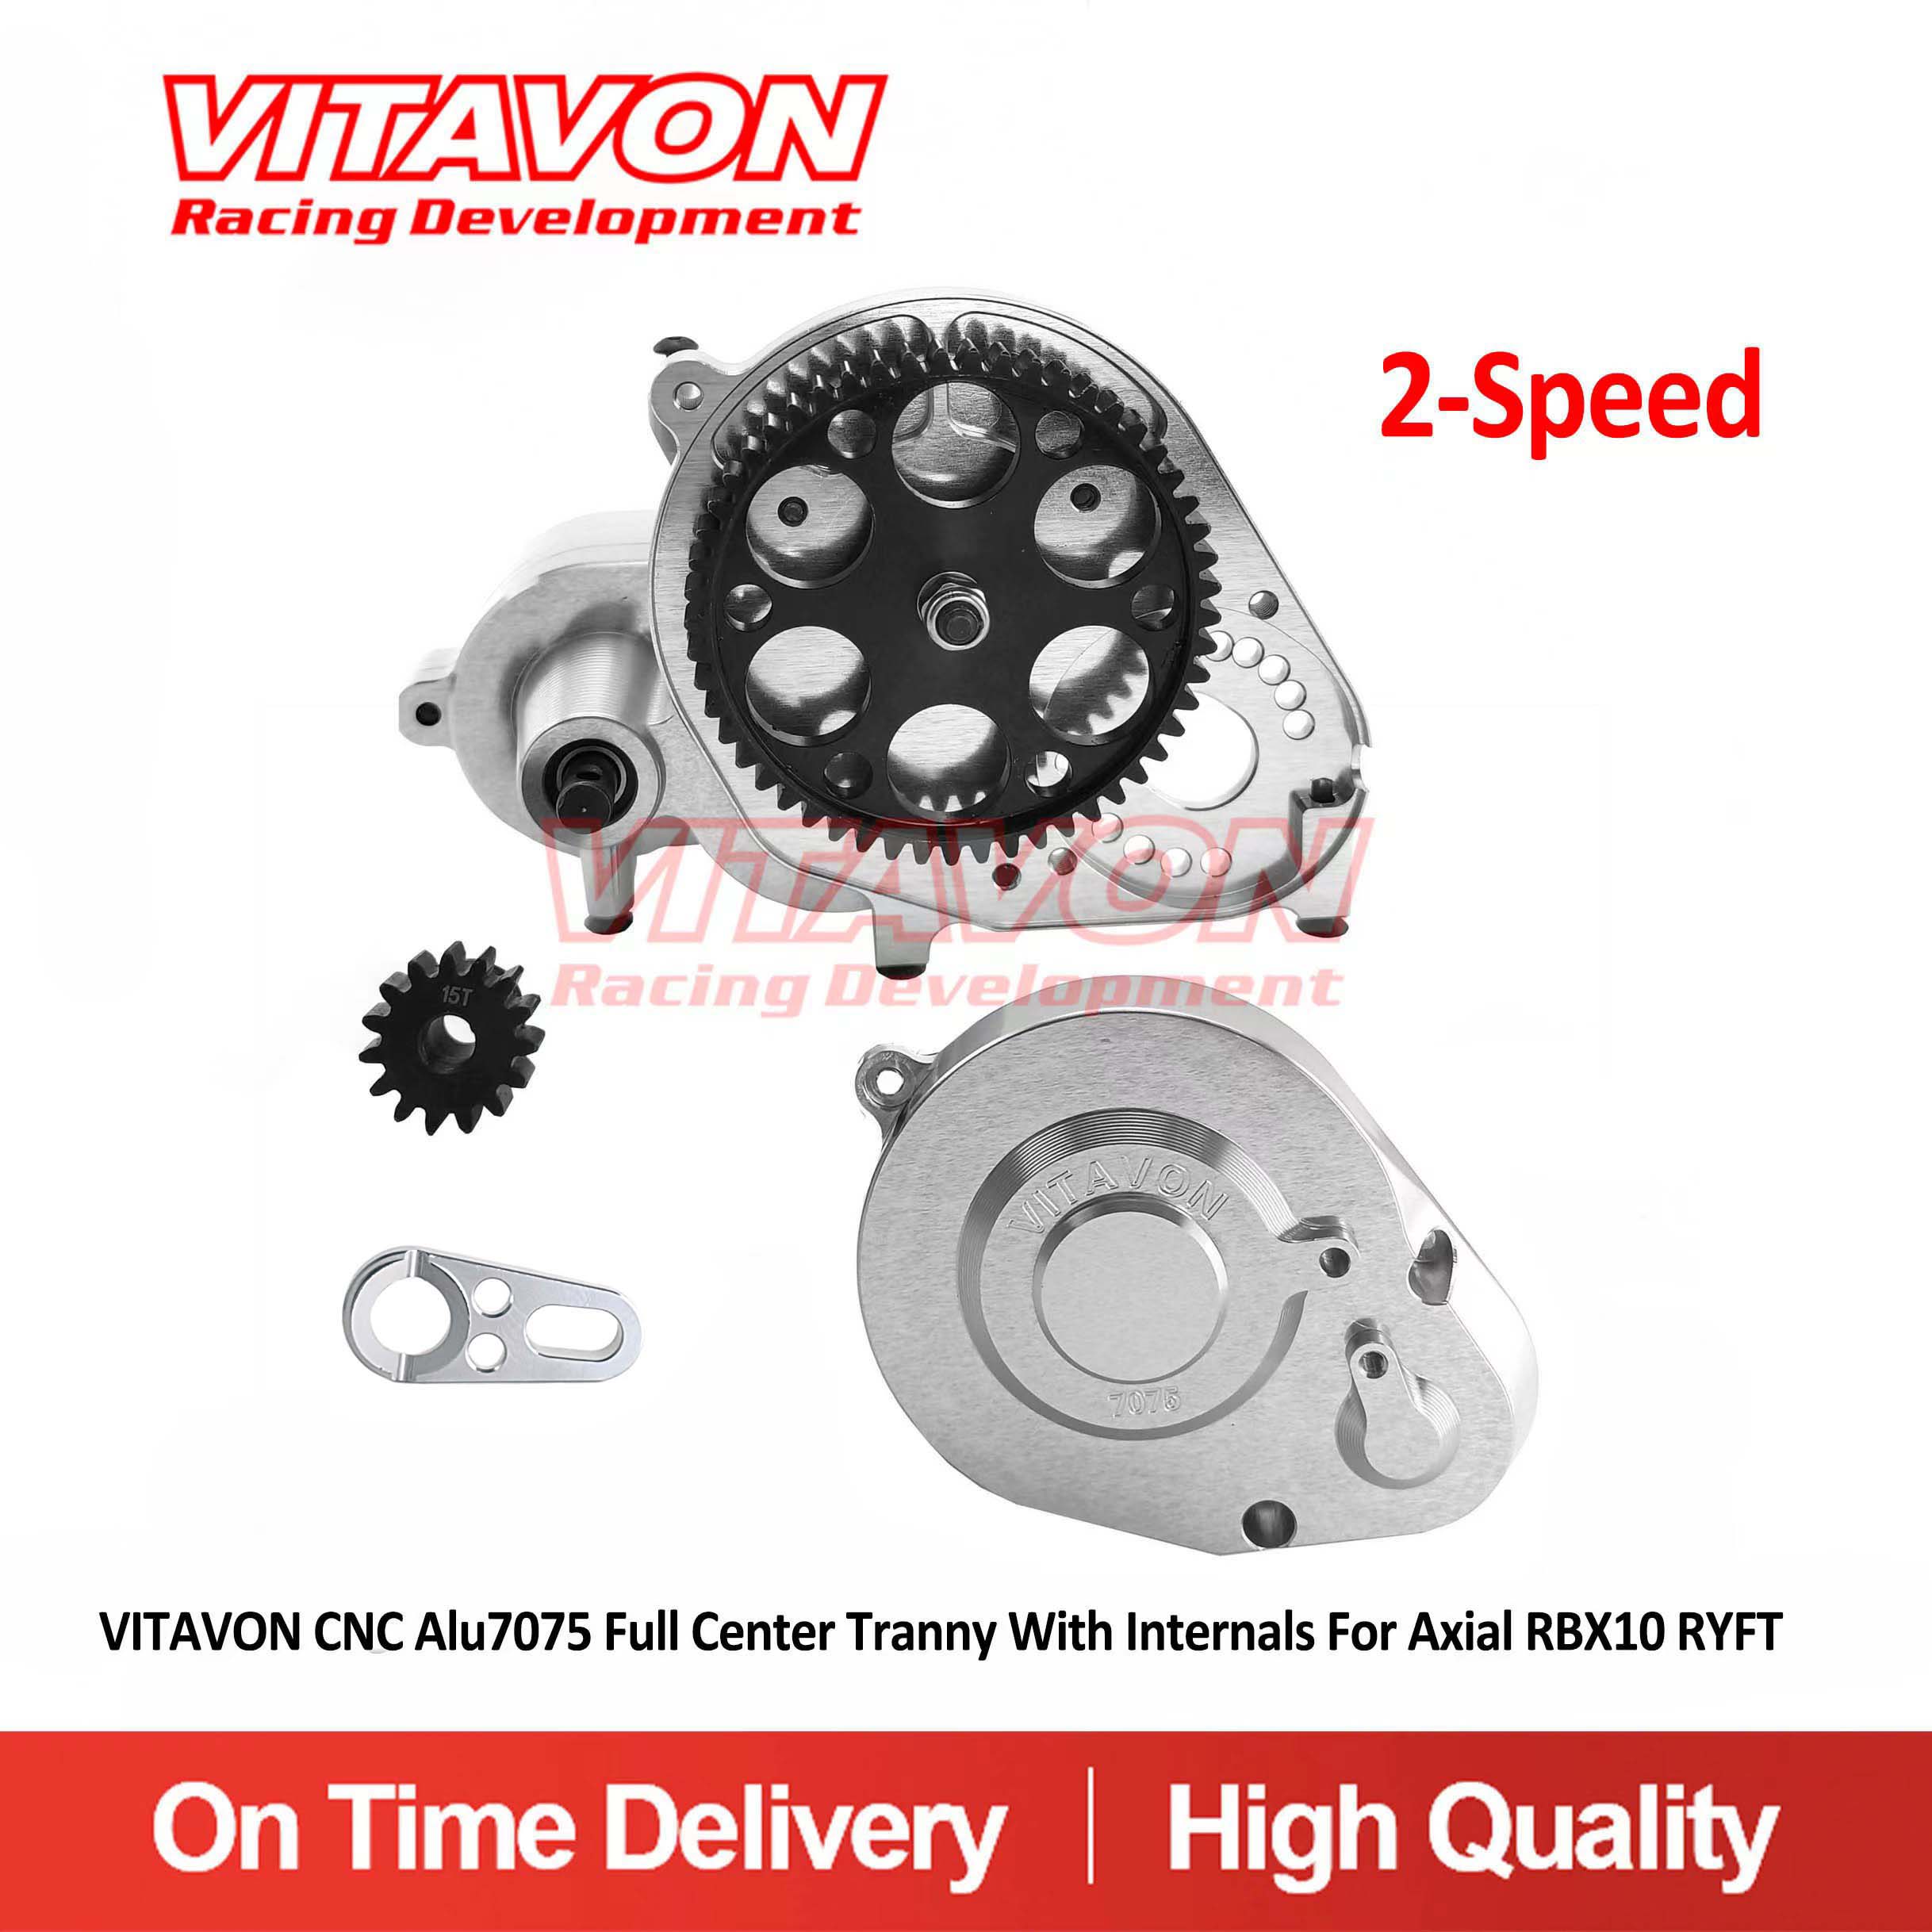 VITAVON CNC Alu7075 Full Center Tranny With Internals For Axial RBX10 RYFT